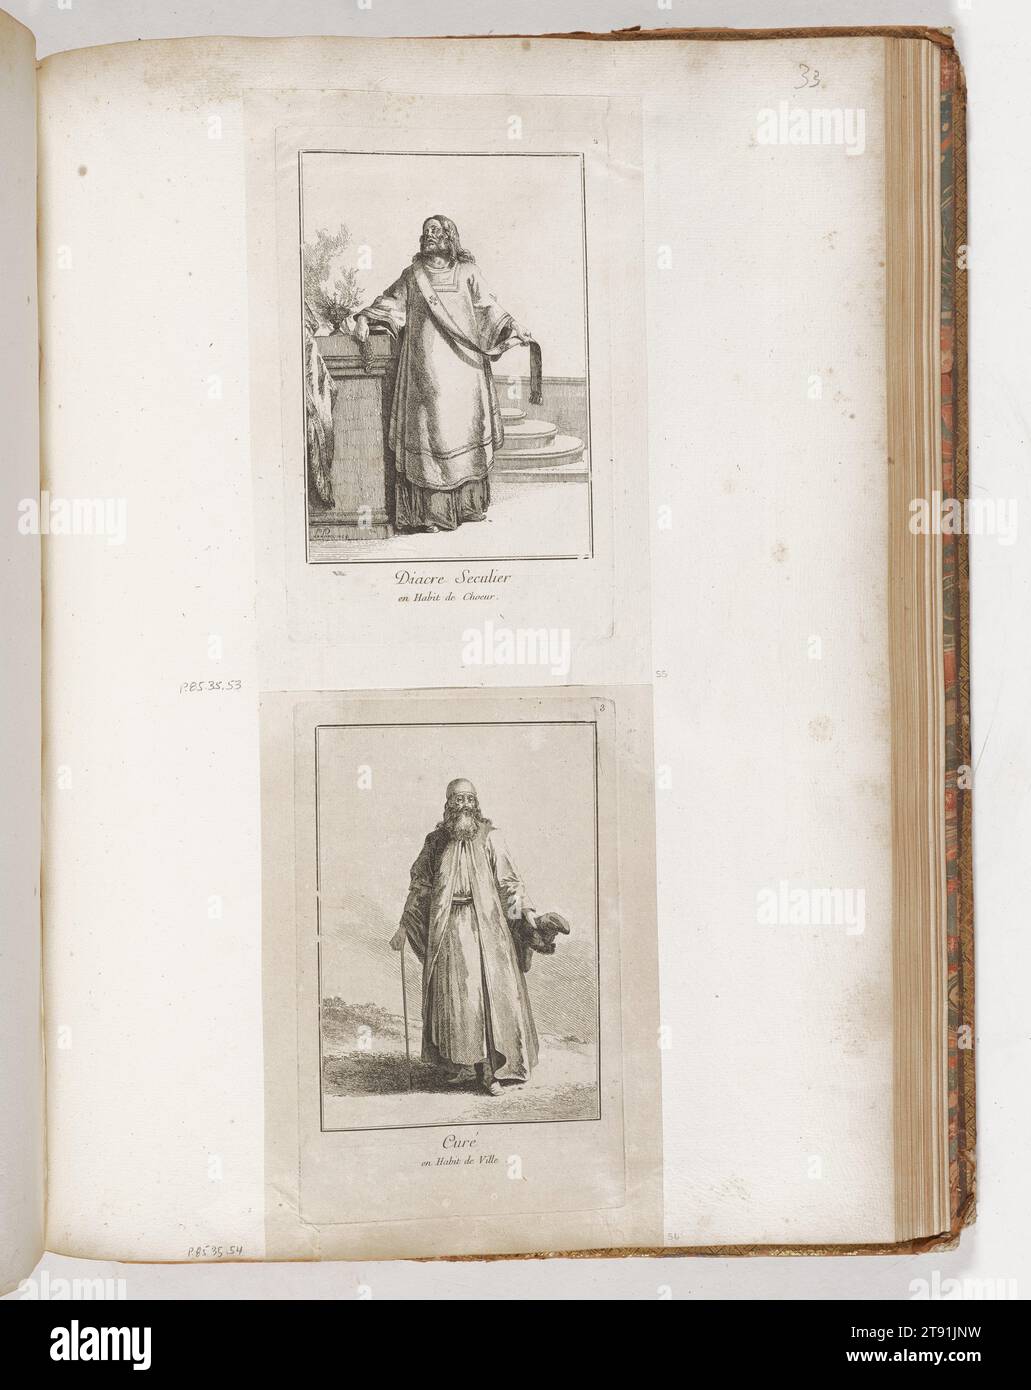 Secular Deacon in Choir Robe, 1764, Jean-Baptiste Le Prince, French, 1734 - 1781, 7 x 5 in. (17.78 x 12.7 cm) (image)8 7/8 x 5 9/16 in. (22.54 x 14.13 cm) (plate)10 5/16 x 6 7/8 in. (26.19 x 17.46 cm) (sheet), Etching, France, 18th century Stock Photo